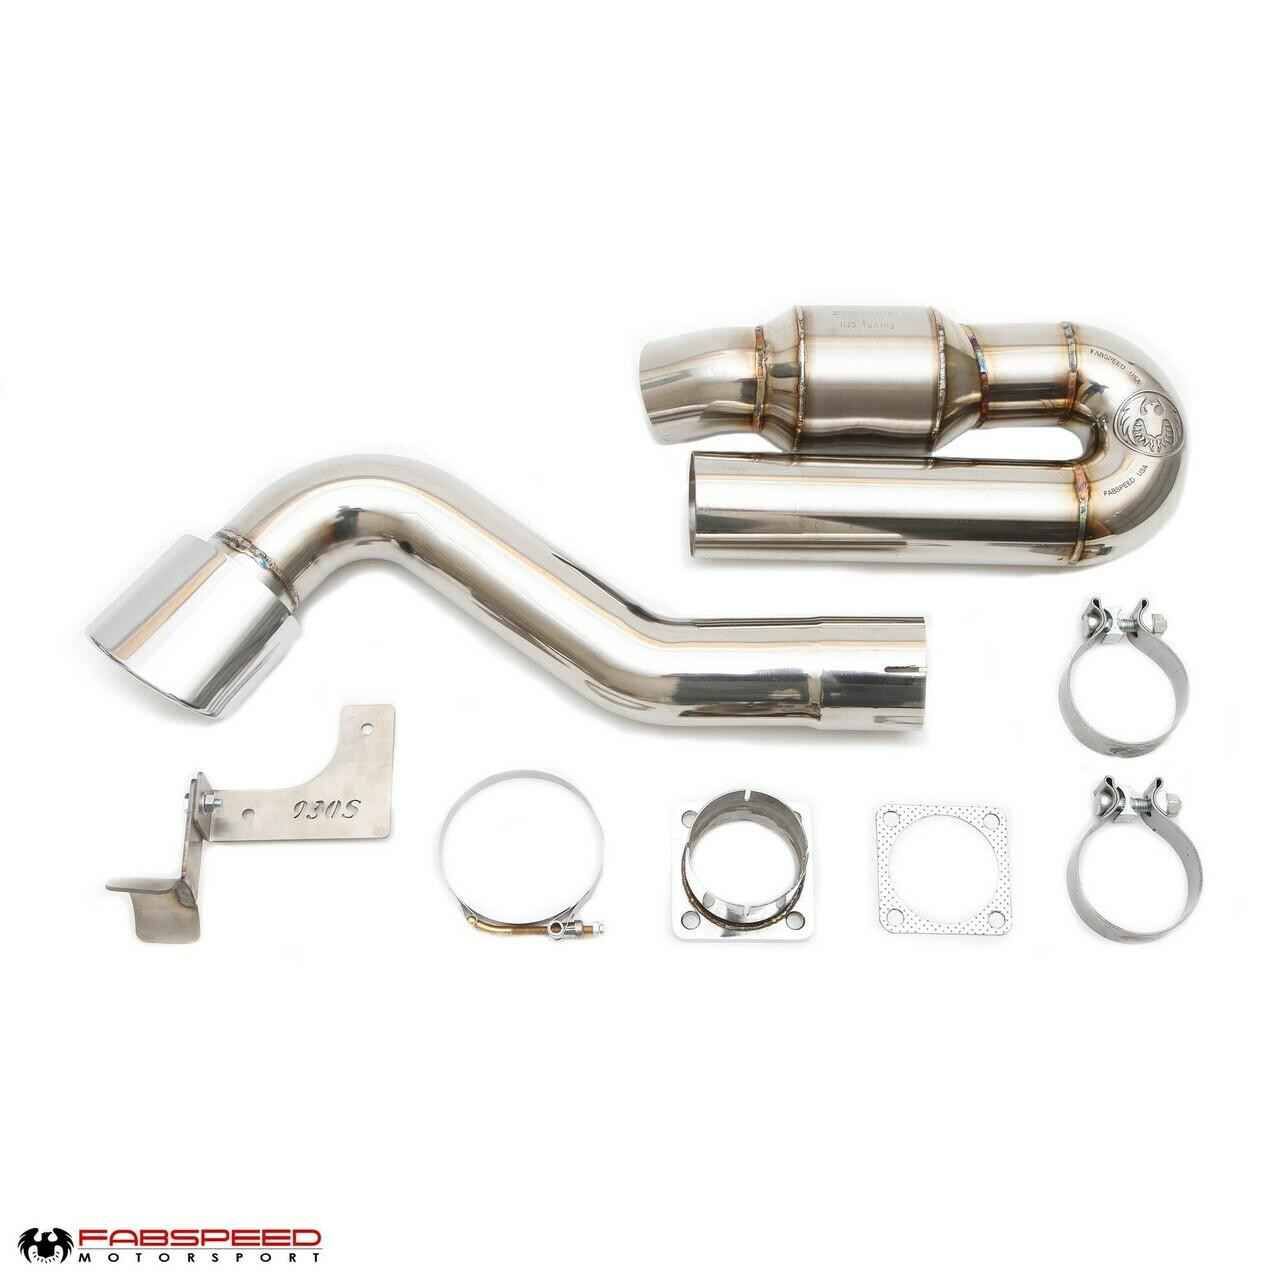 Fabspeed 911 Turbo 930 Sport Muffler Bypass Exhaust System with Catalyst (1976-1989)